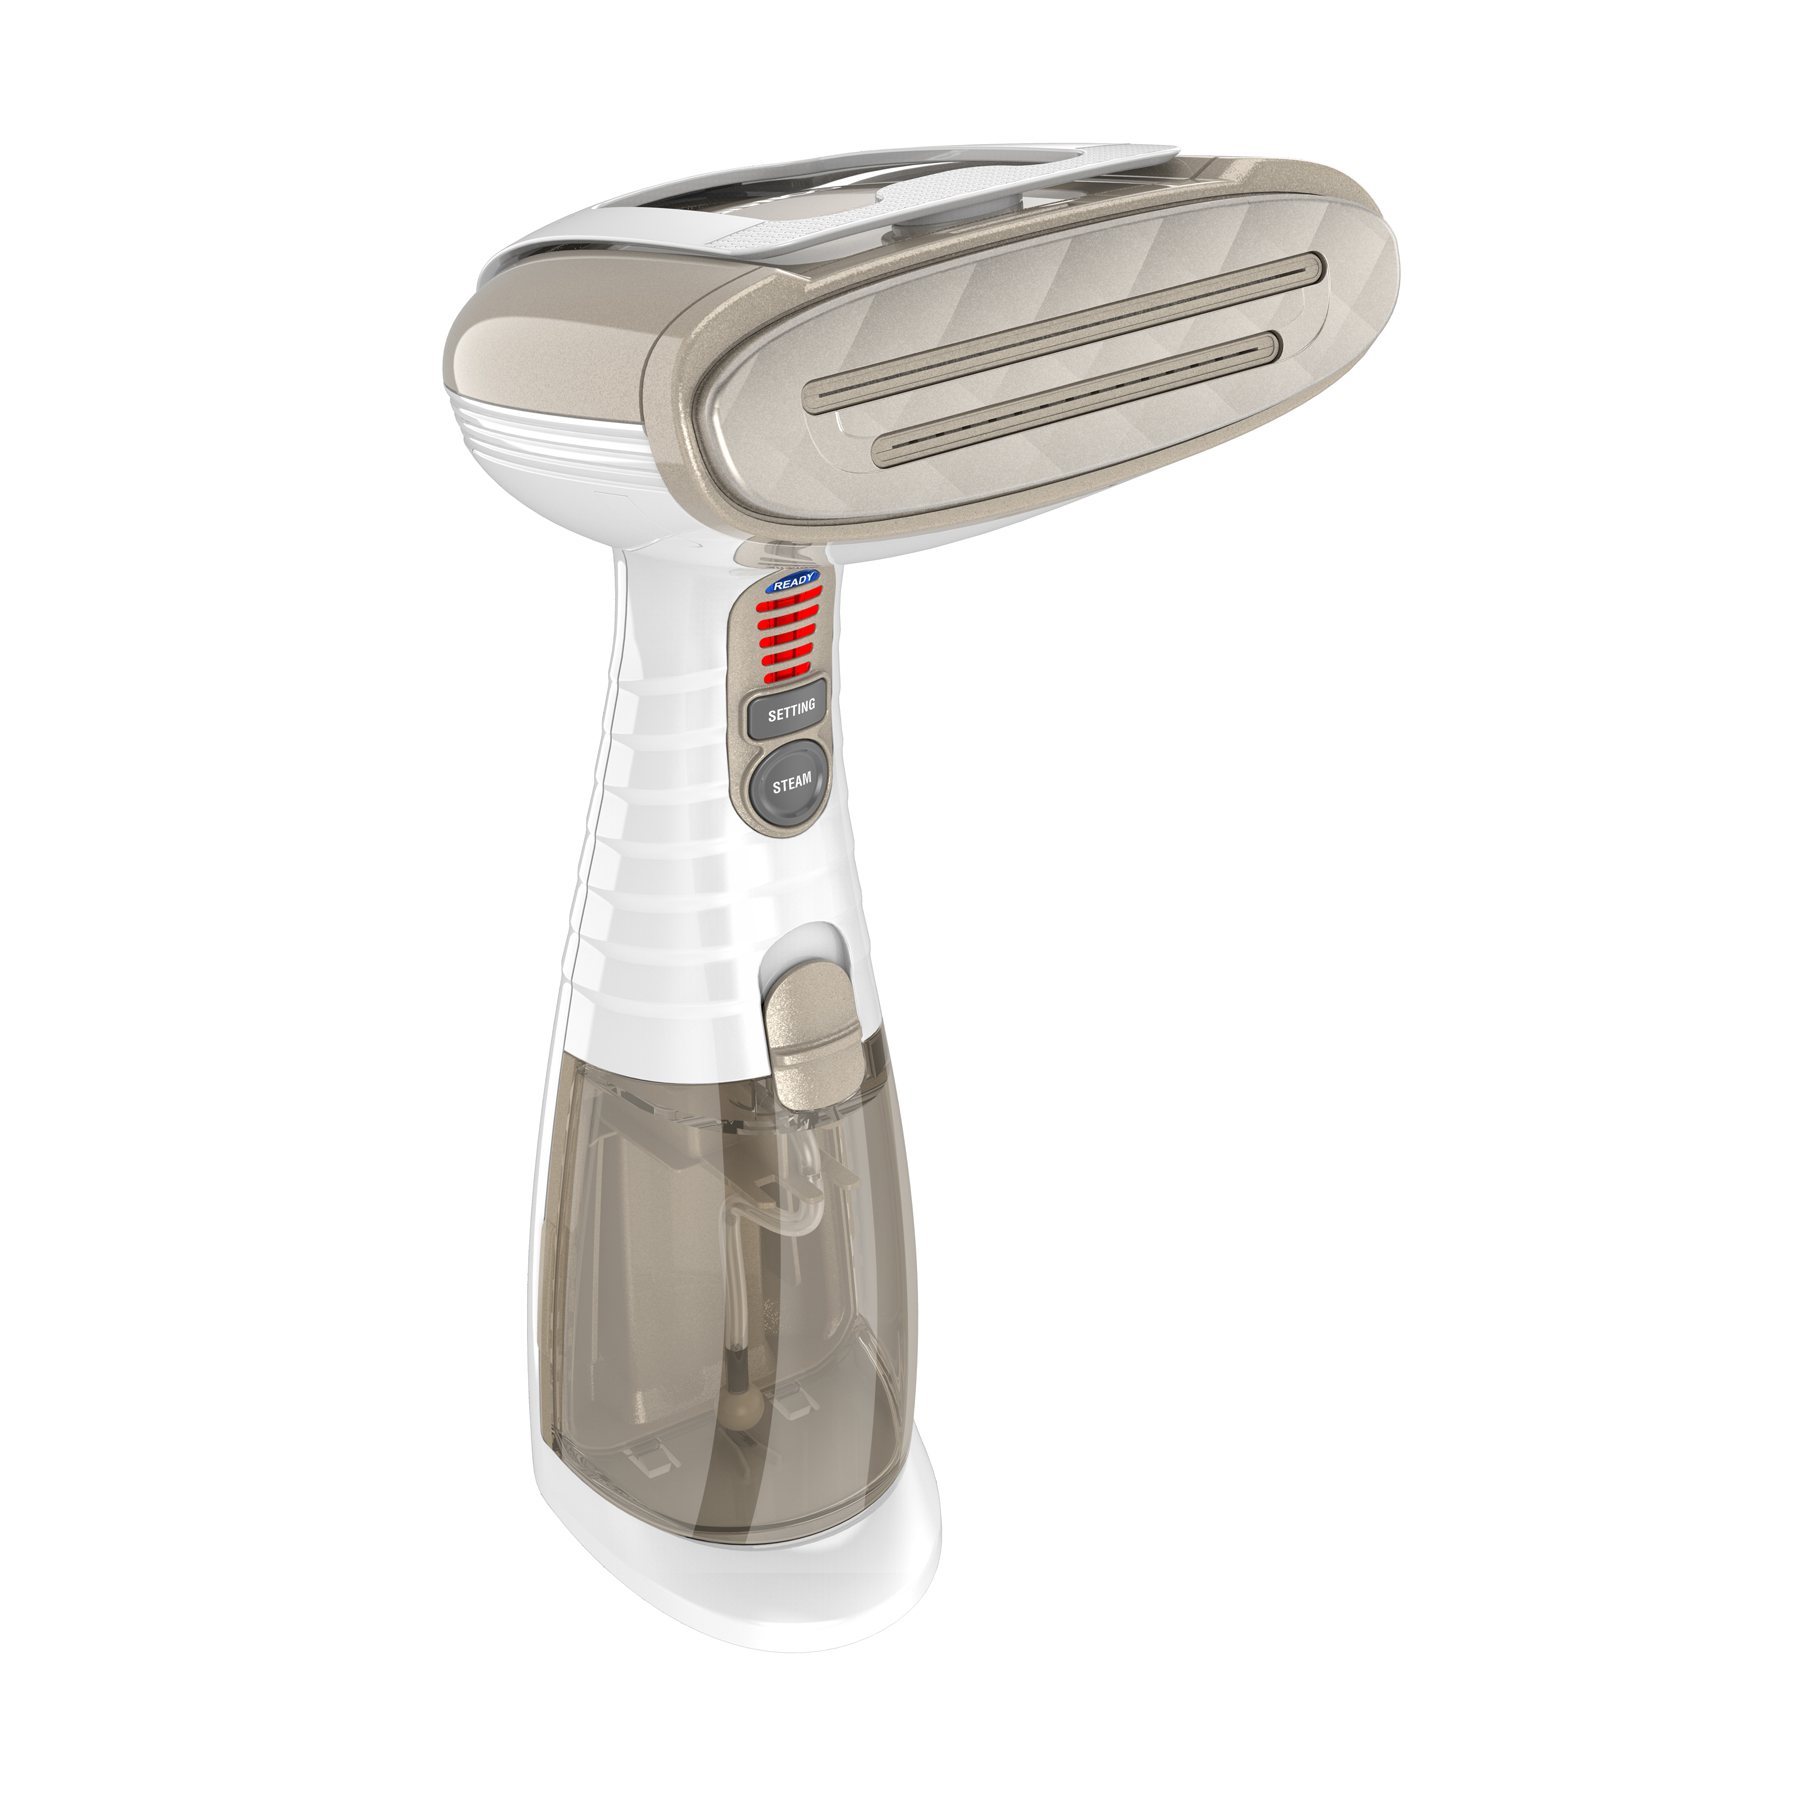 Conair Turbo Extreme Steam Hand Held Fabric Steamer, White/Champagne GS59 - image 1 of 12